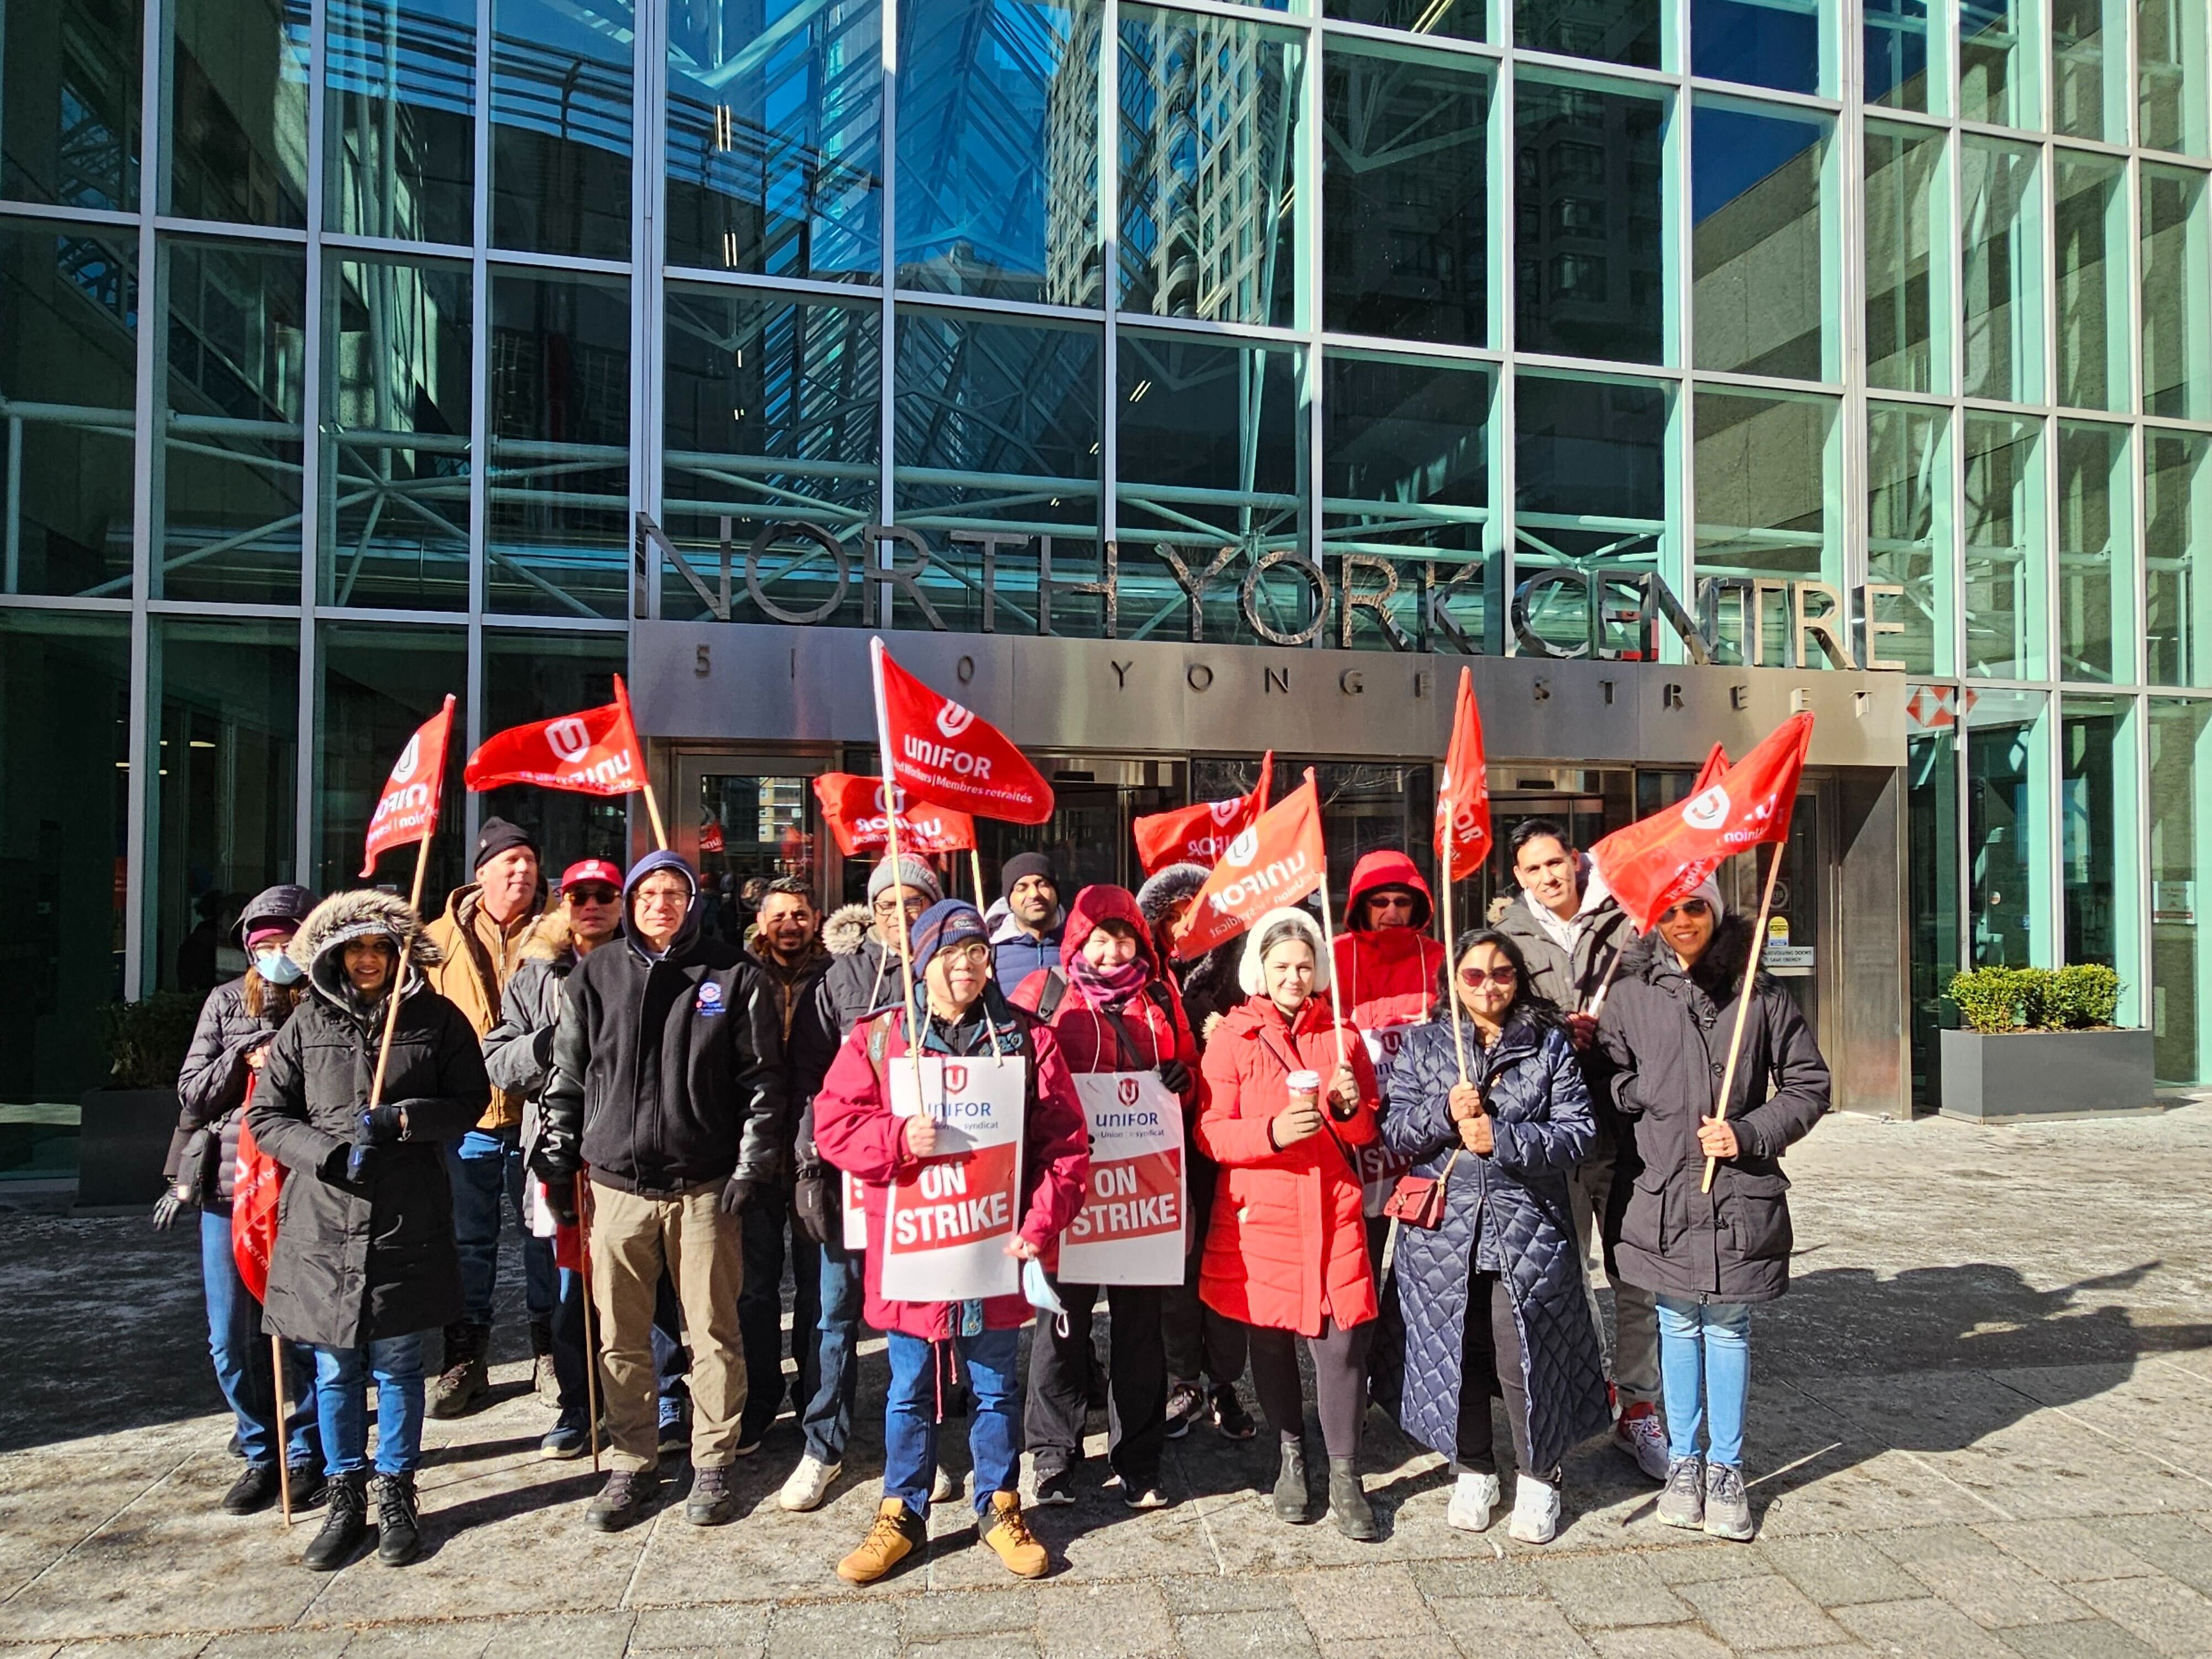 A large group of people standing in the sun wearing winter cloths holding picket signs and Unifor flags.